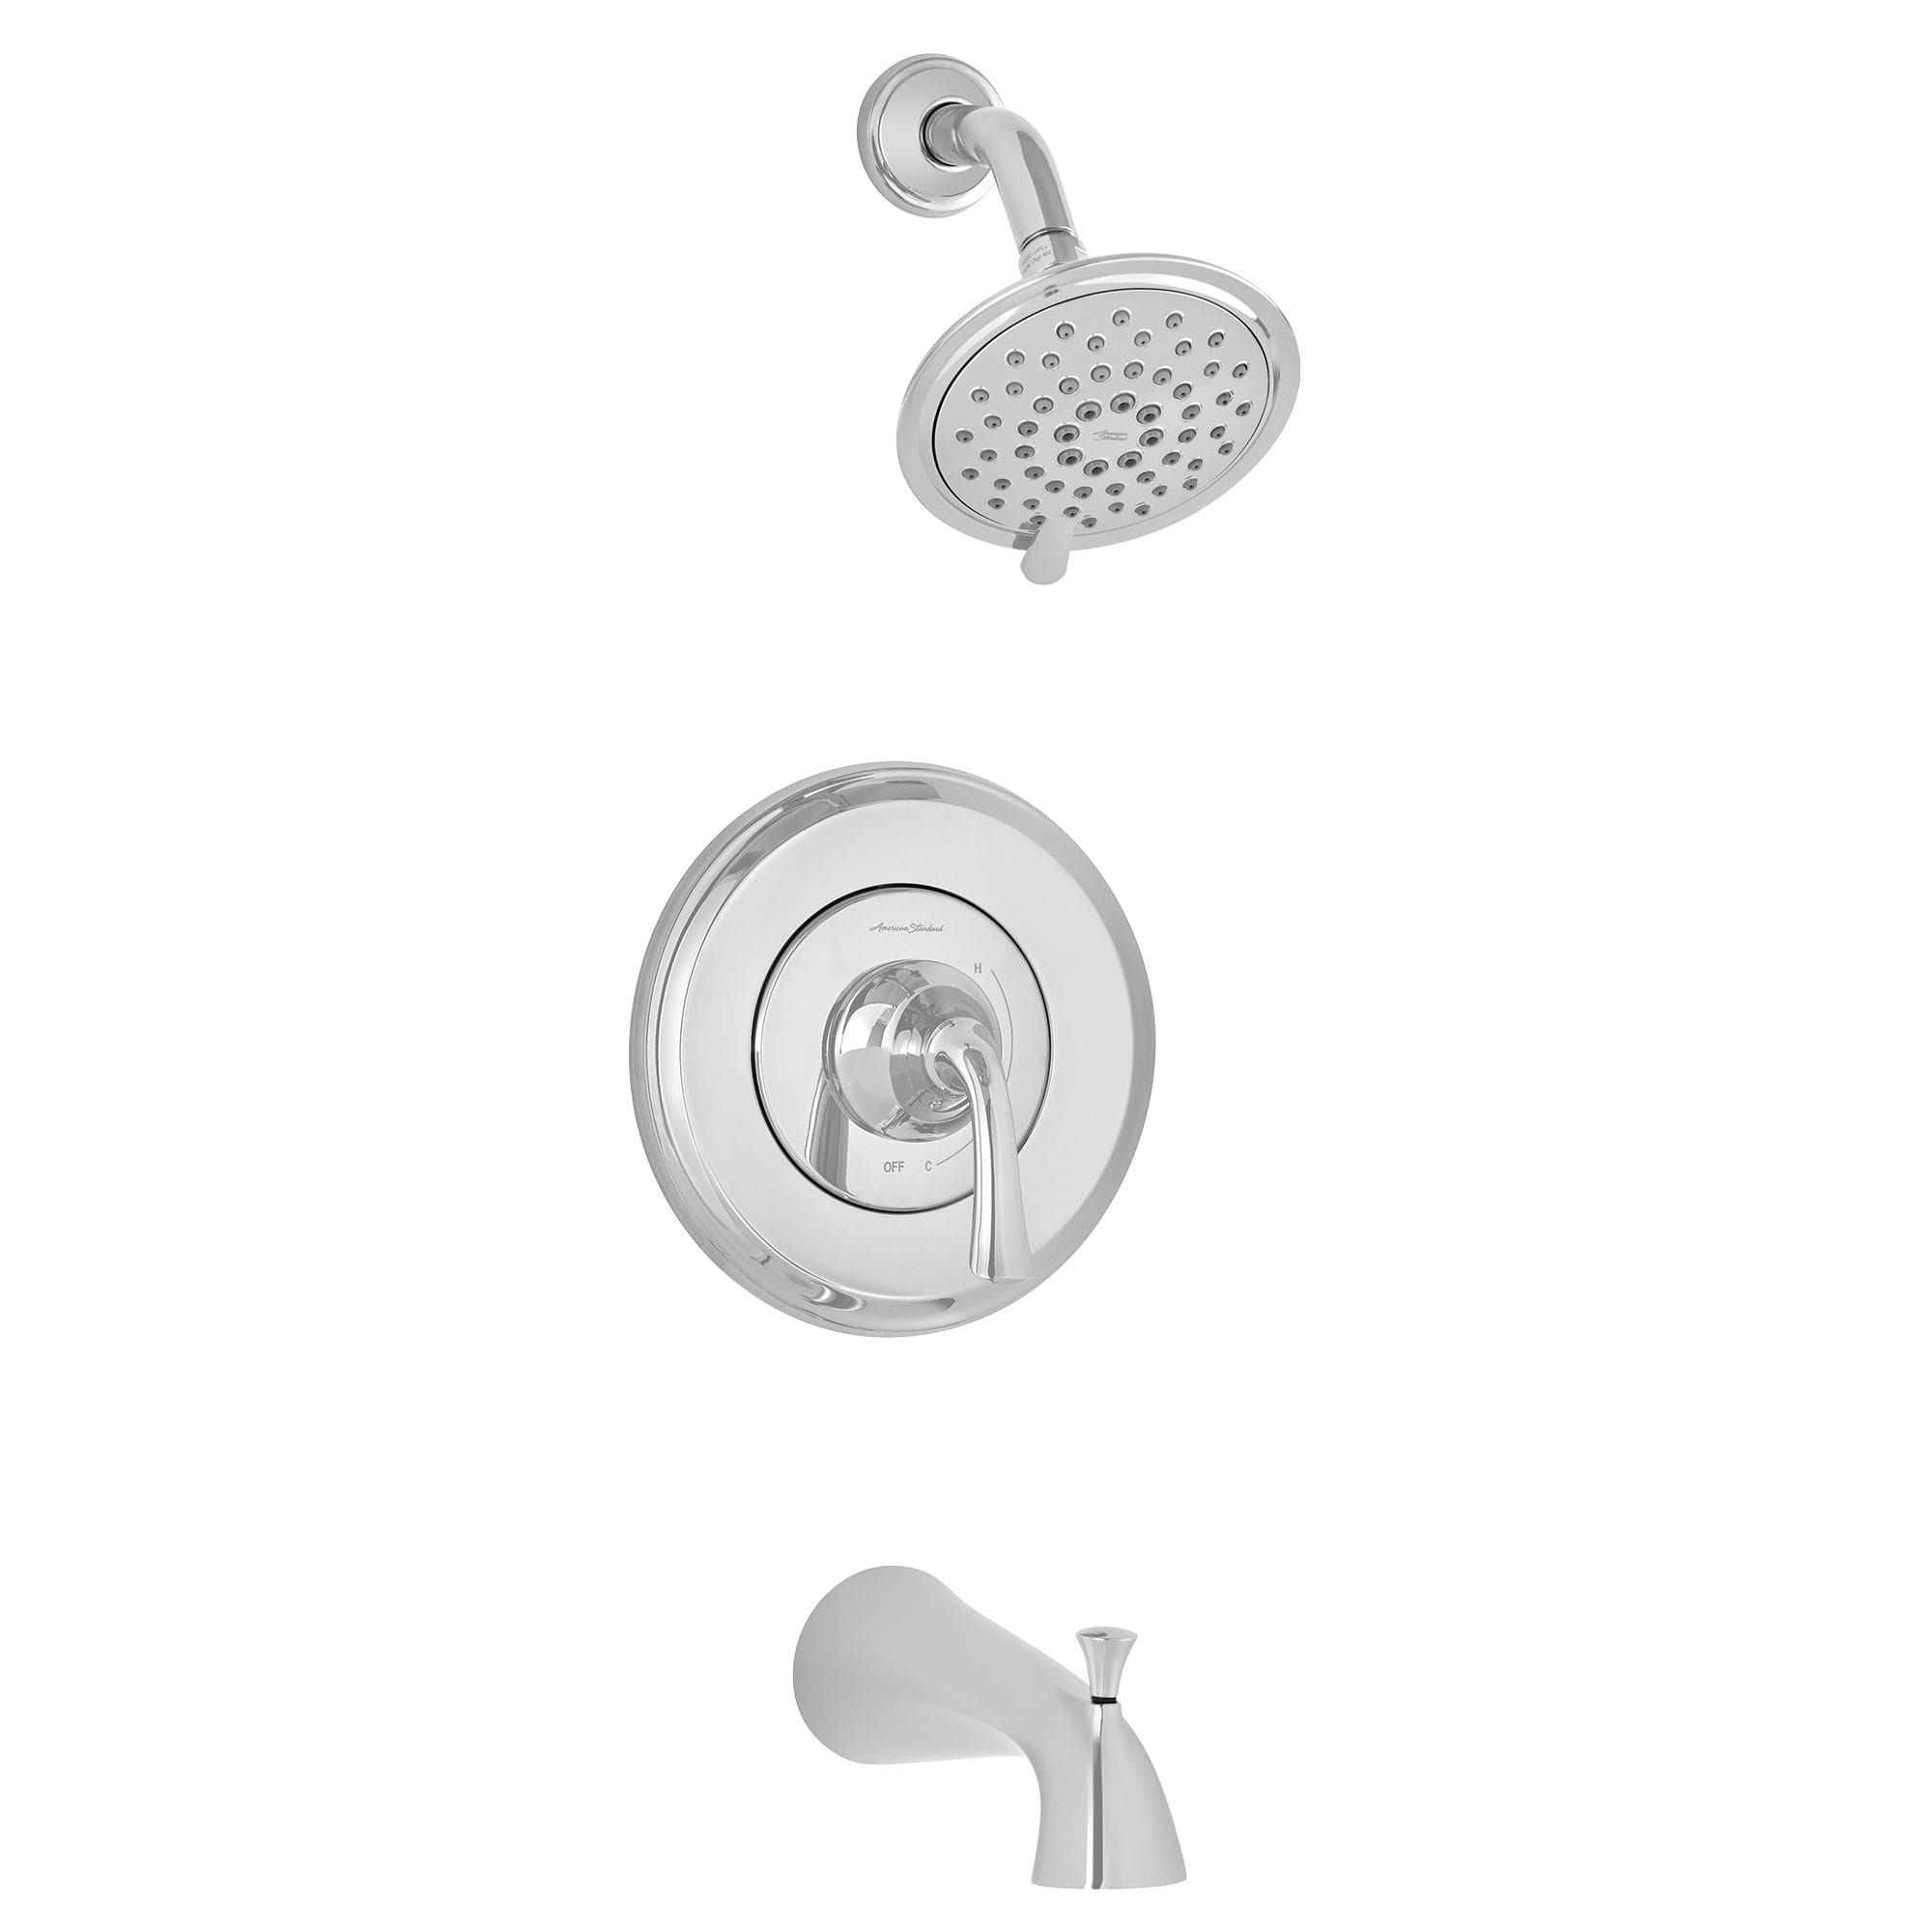 Patience 25 gpm 95 L min Tub and Shower Trim Kit With 3 Function Showerhead Double Ceramic Pressure Balance Cartridge With Lever Handle CHROME